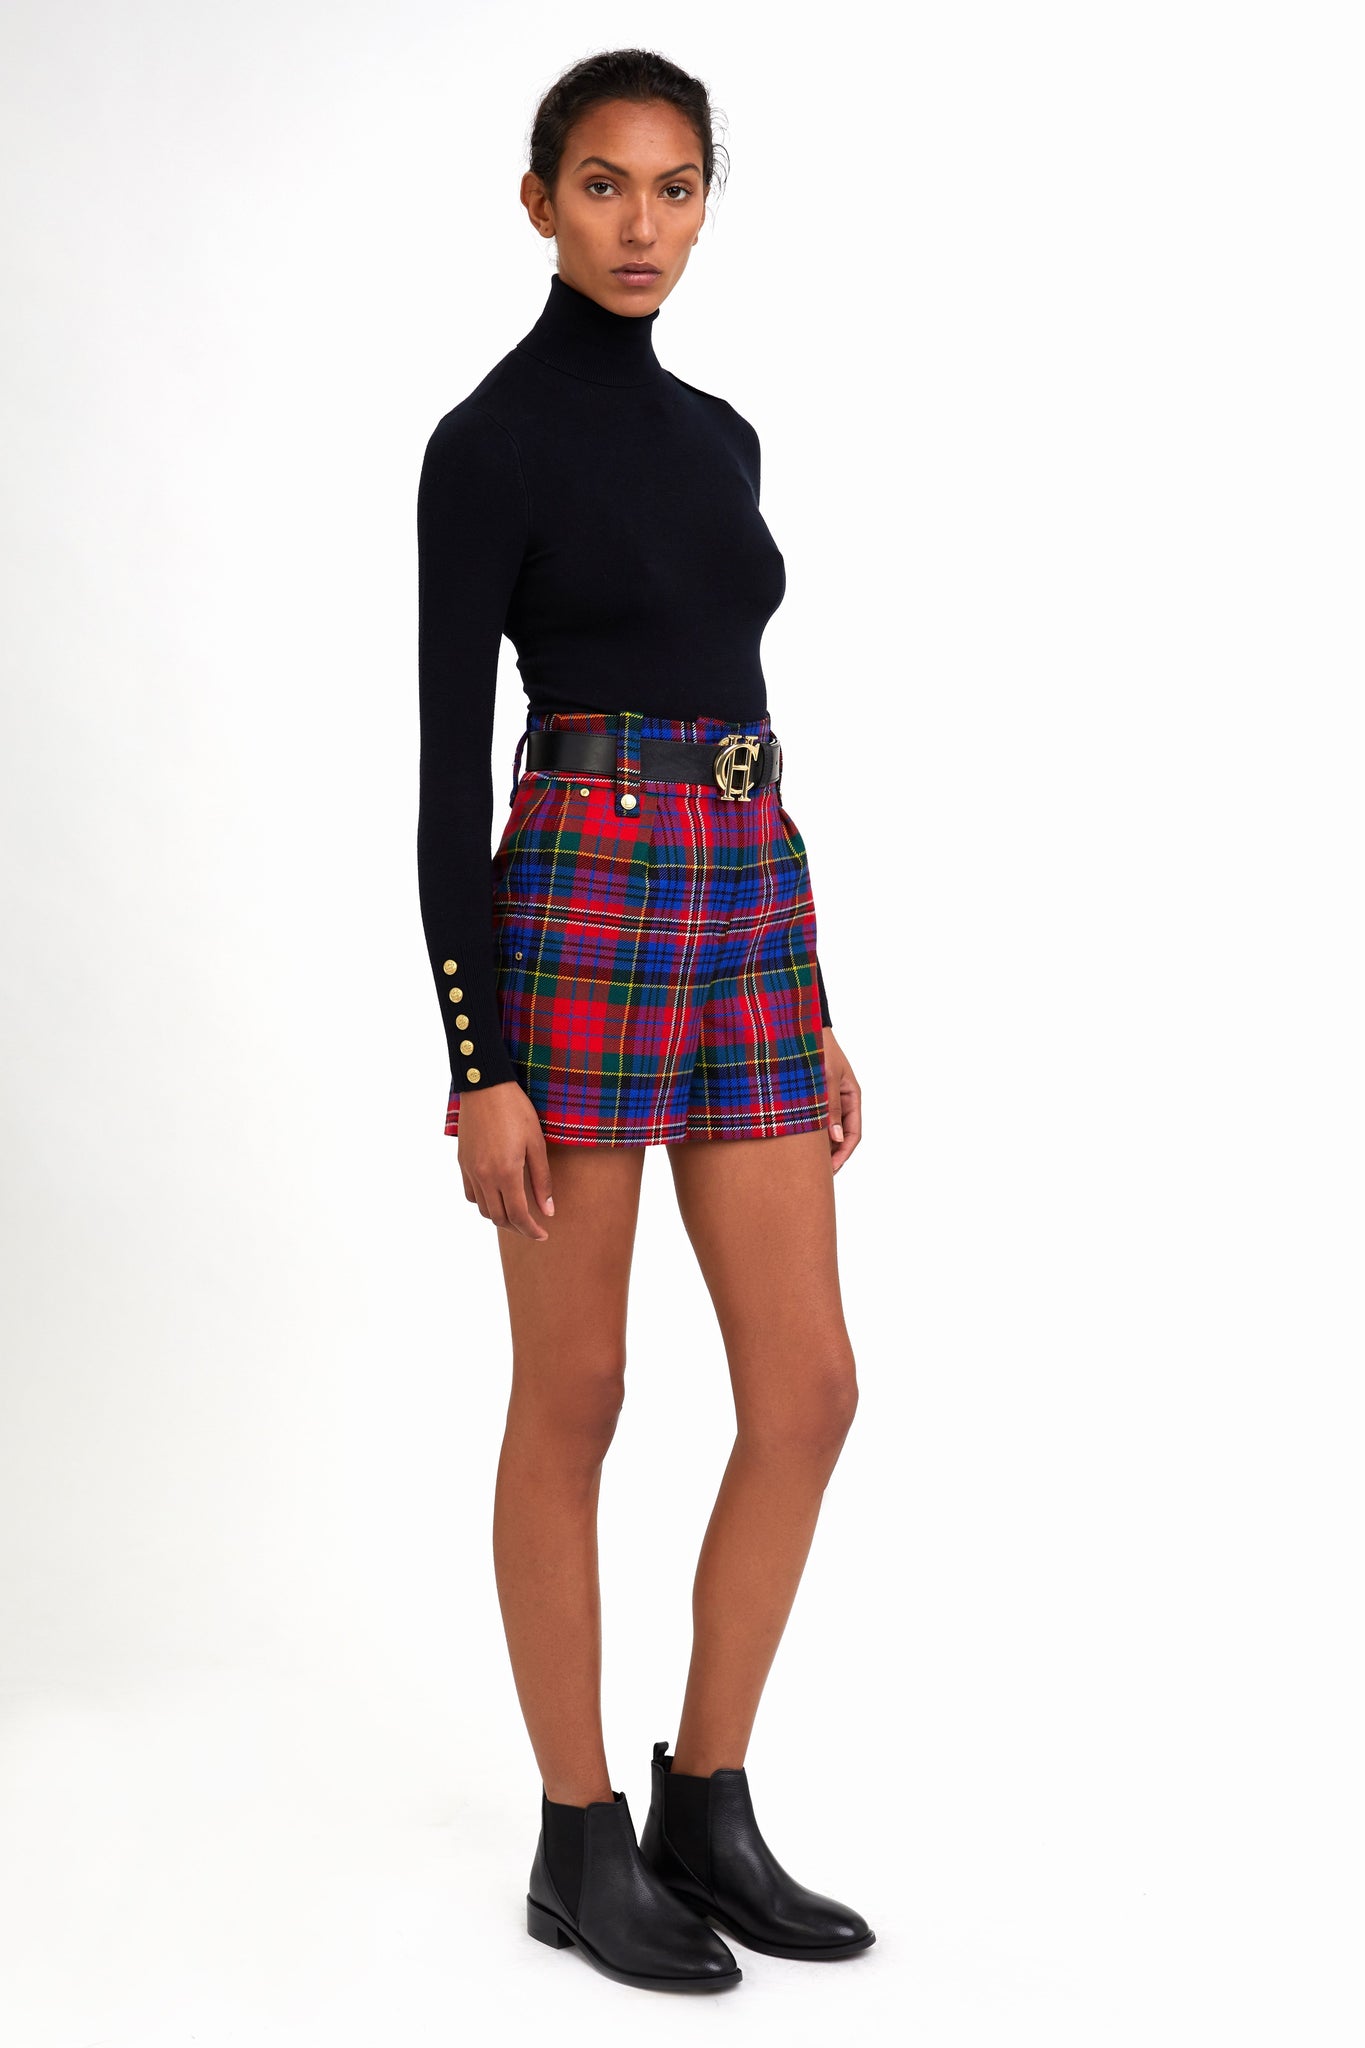 womens red blue and green tartan high rise tailored shorts with two single knife pleats and centre front zip fly fastening with twin branded gold stud buttons and side hip pockets with branded rivet detailing at top and bottom of pockets worn with black roll neck